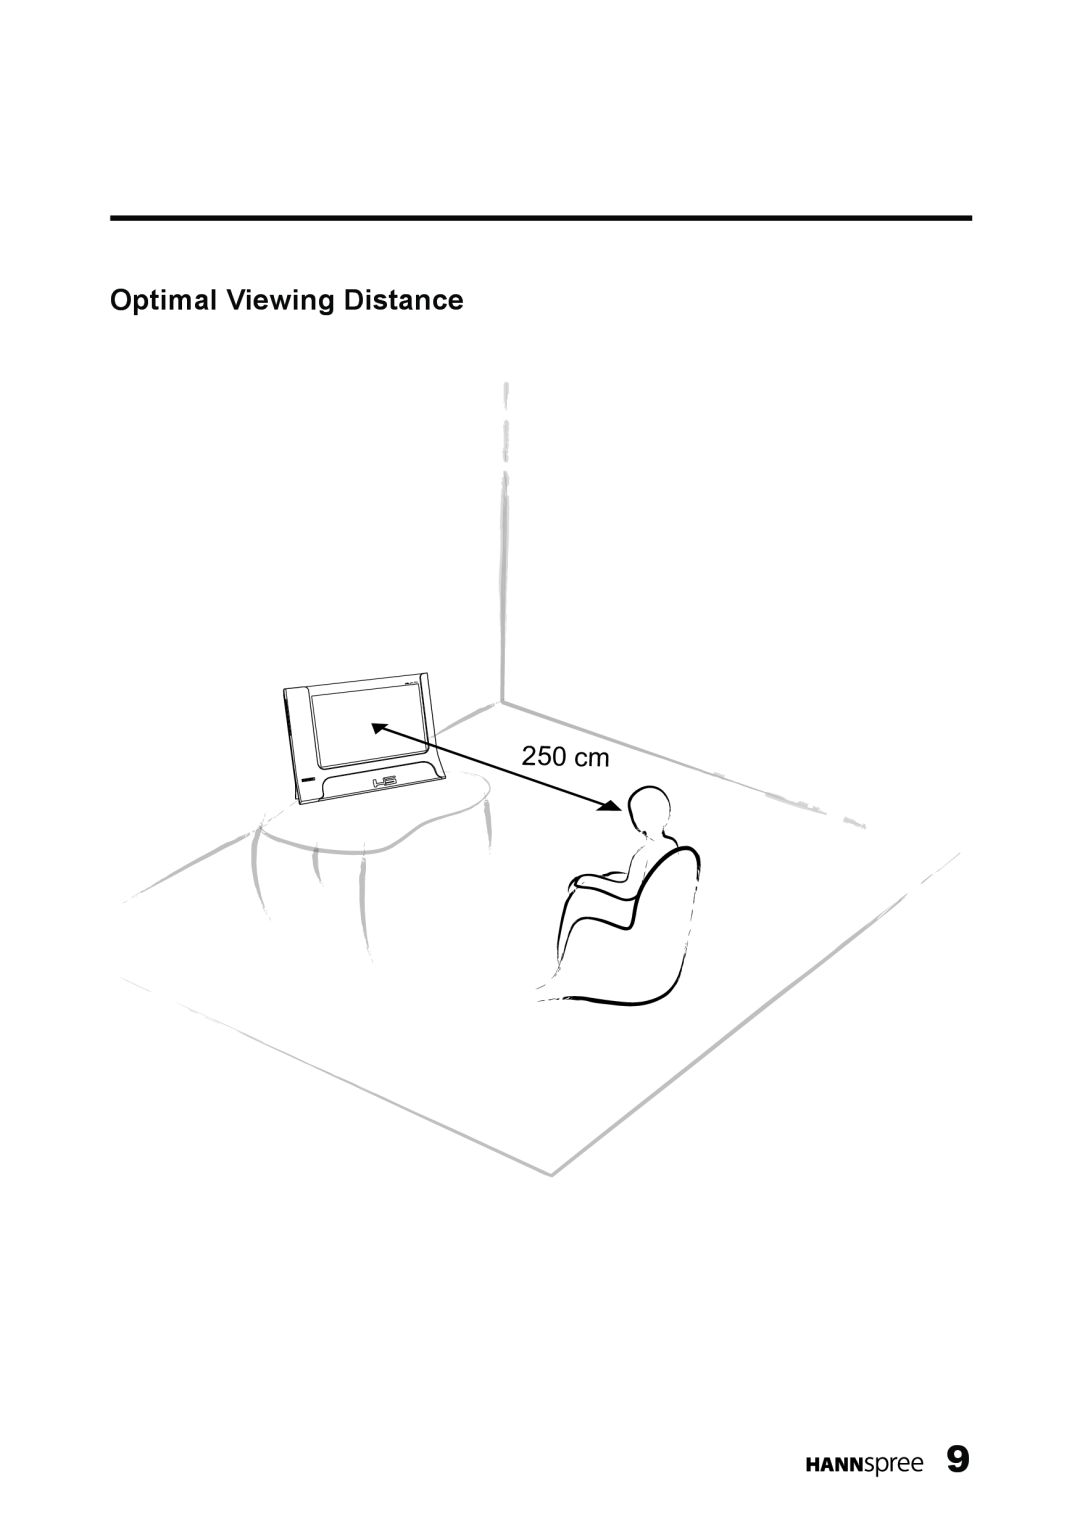 HANNspree LT11-23A1 user manual Optimal Viewing Distance 